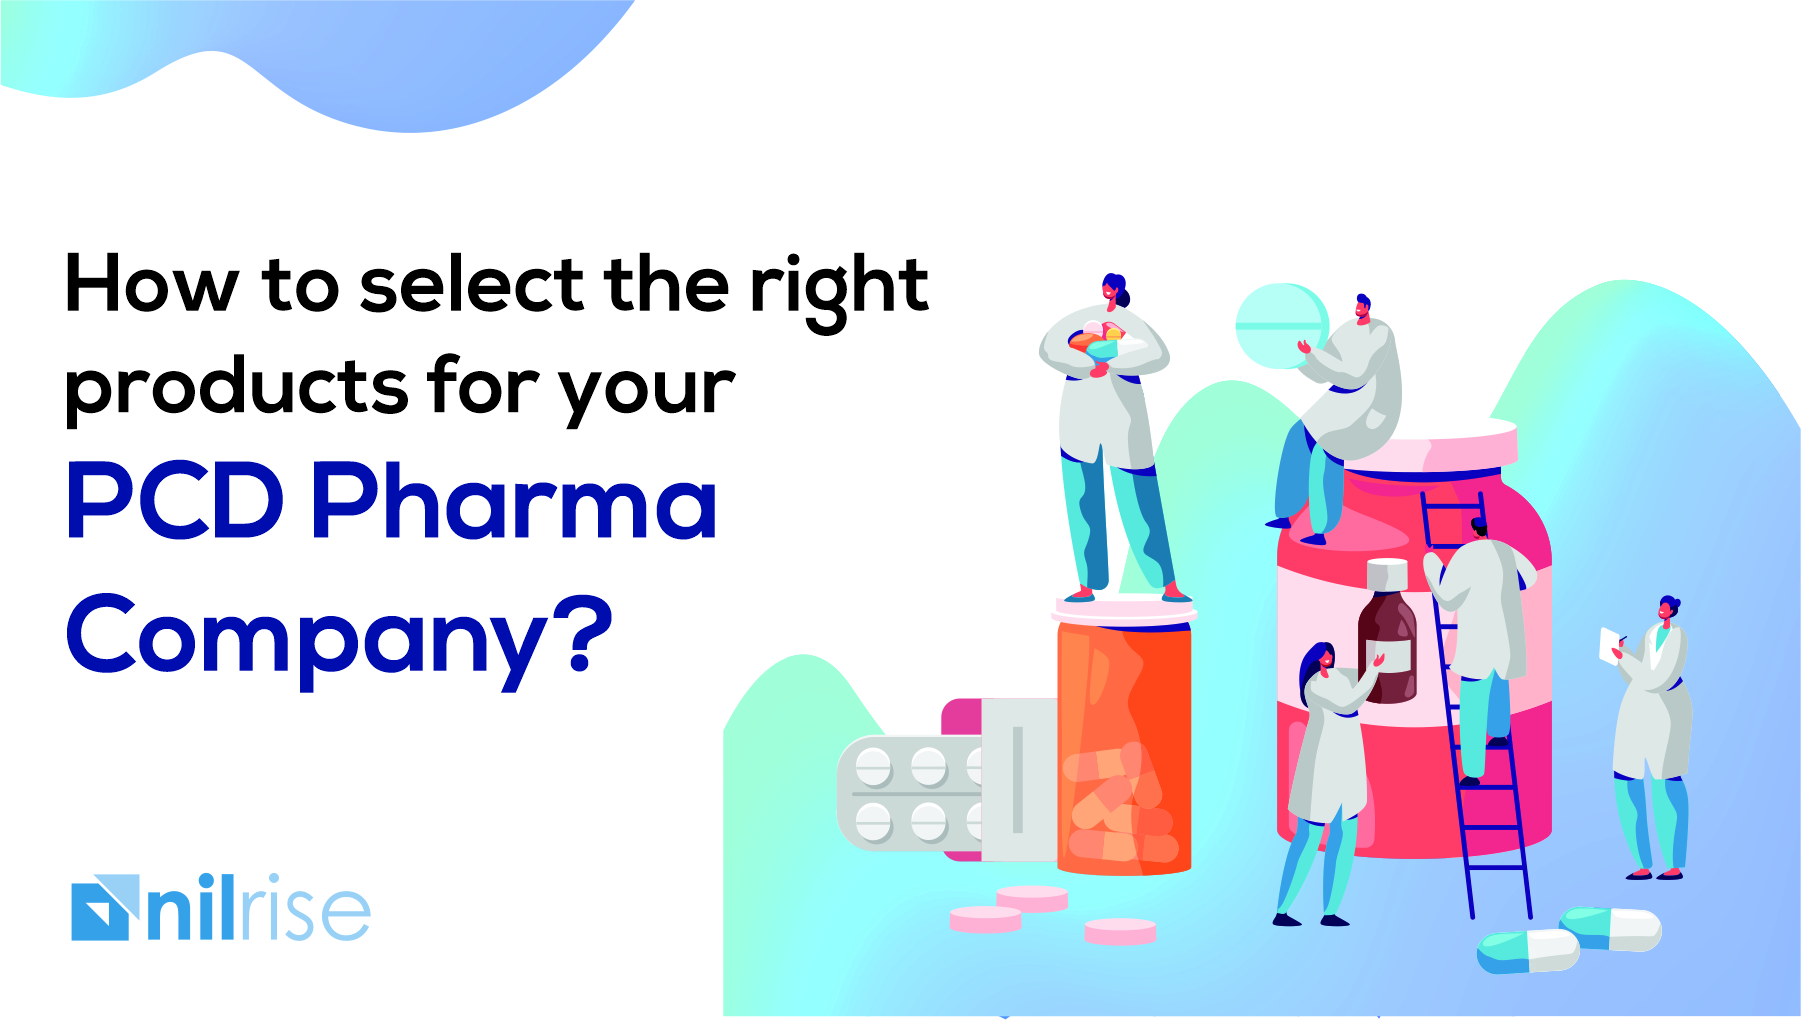 How to select the right products for your PCD Pharma Company